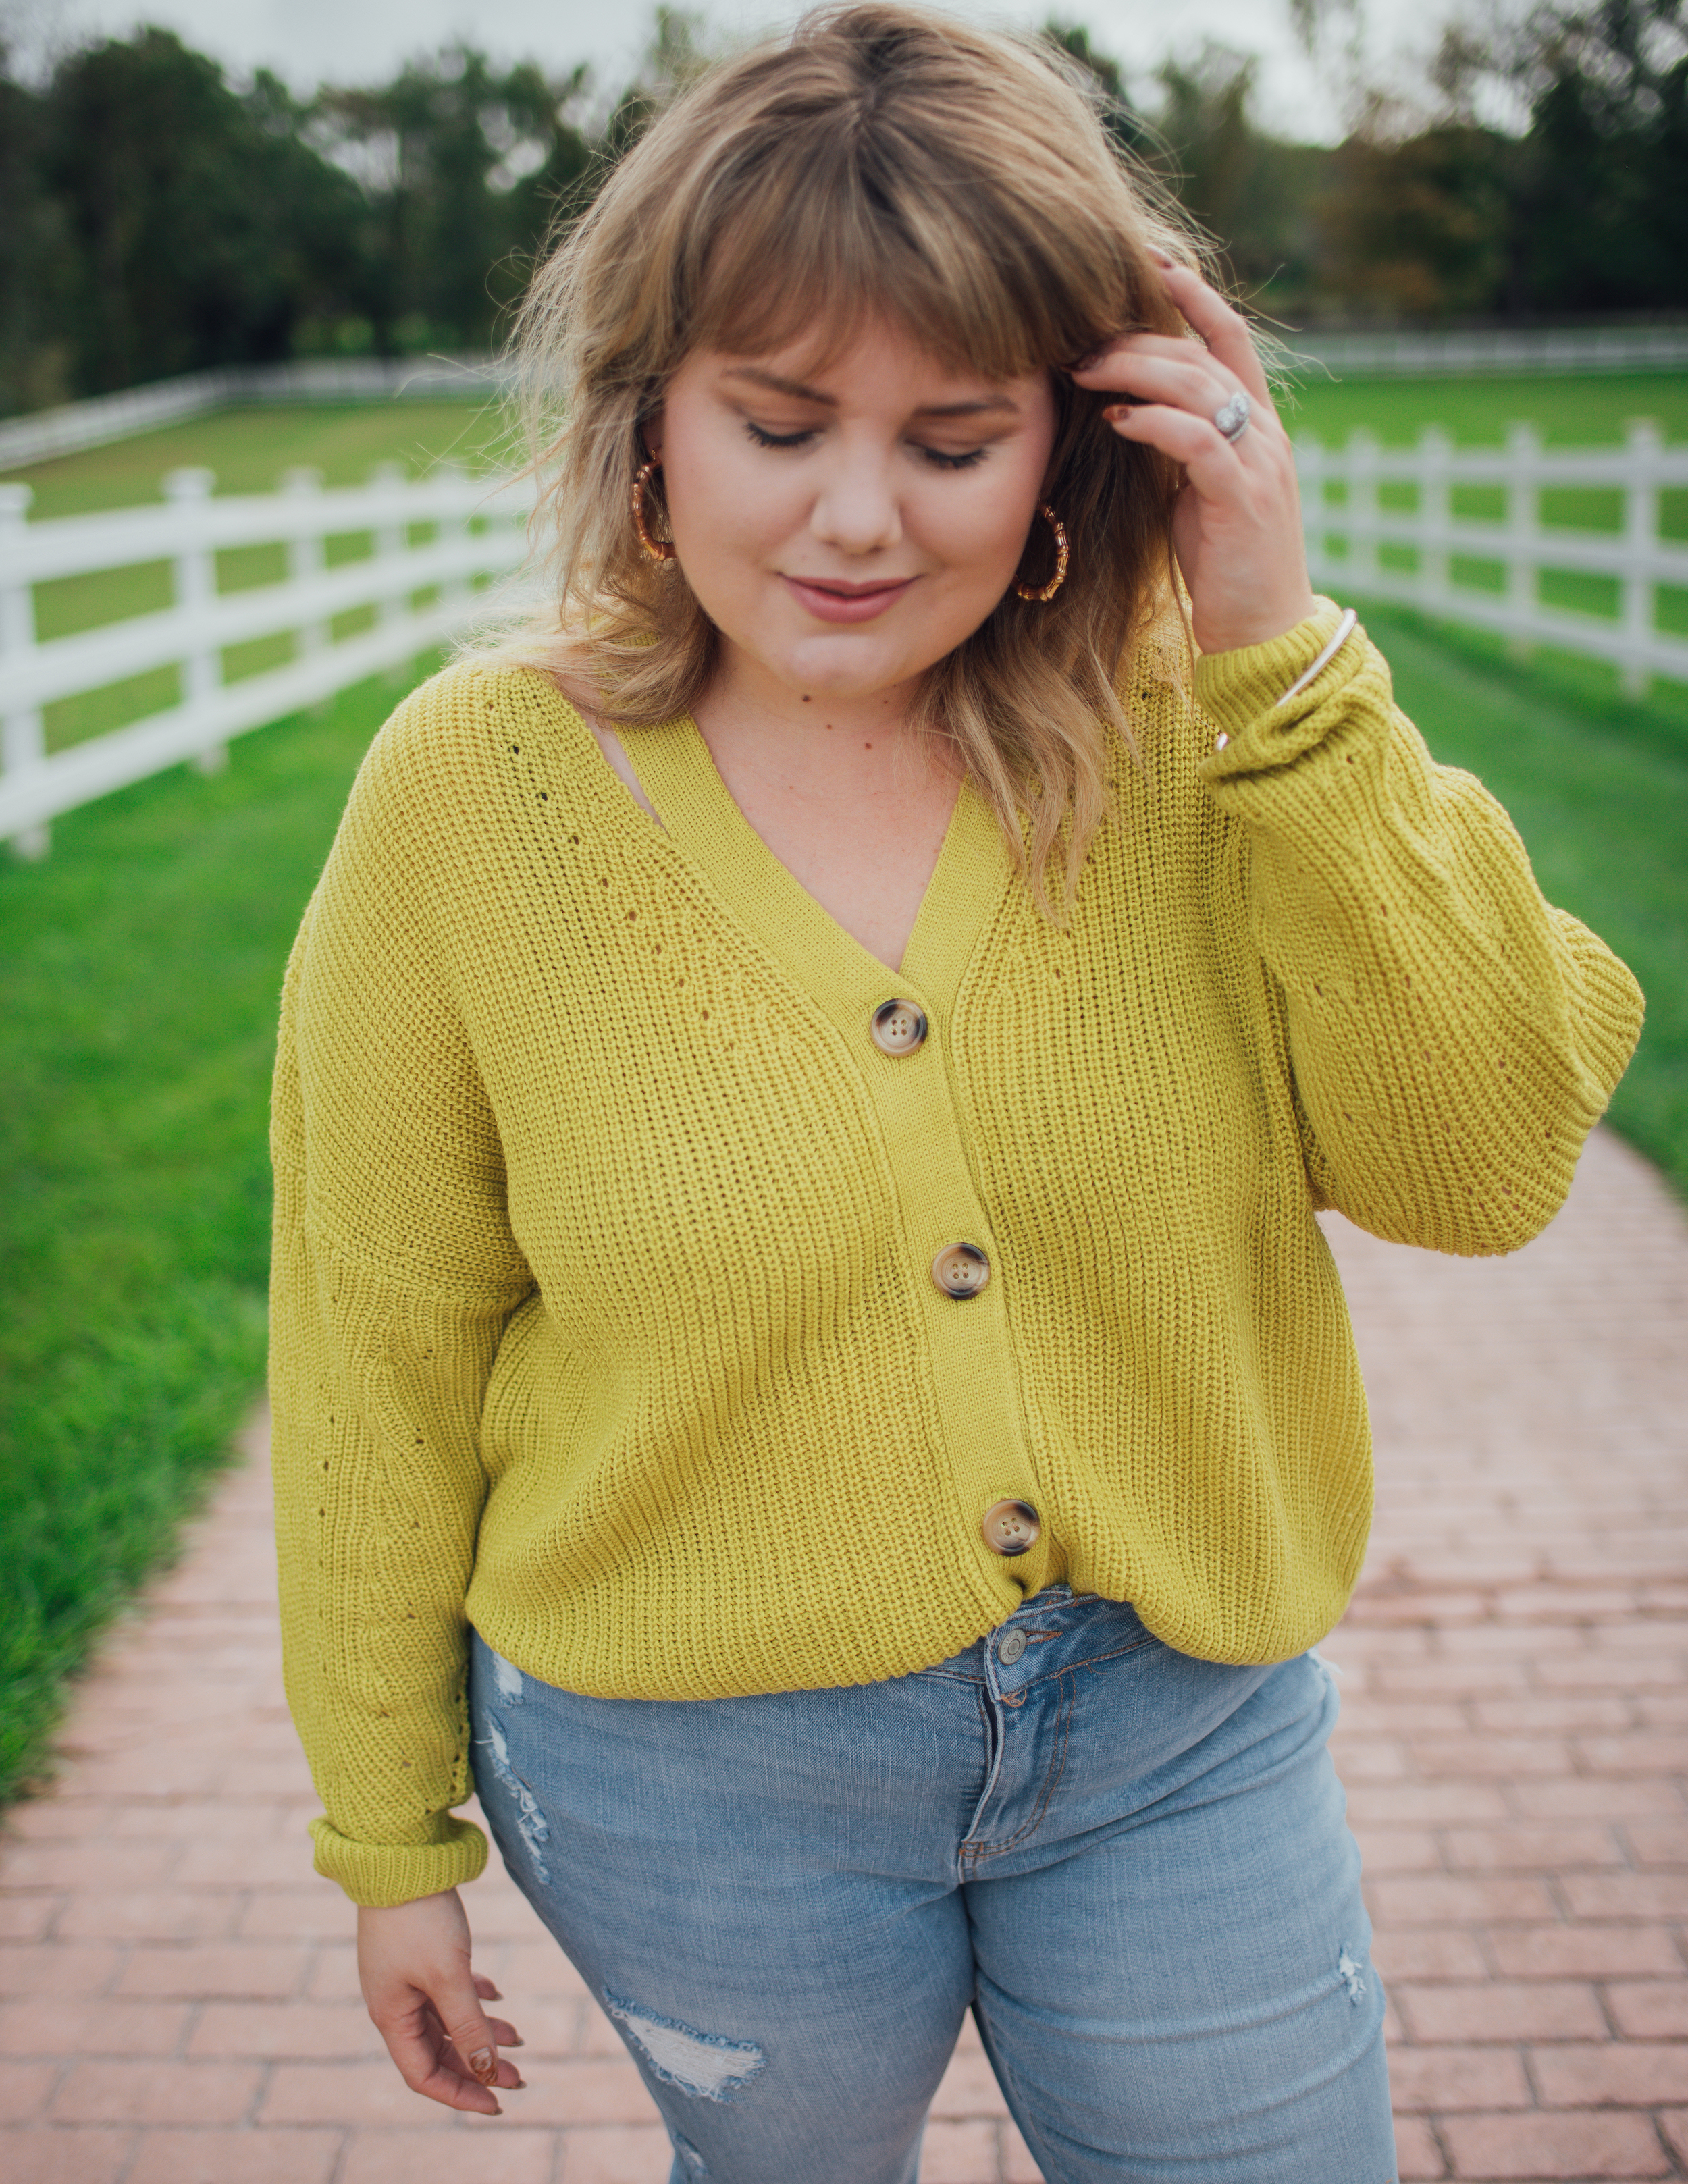 Sharing some cute sweaters from the brand Cato, and a chic cardigan and flare denim outfit! I styled a plus size green cardigan from Cato.